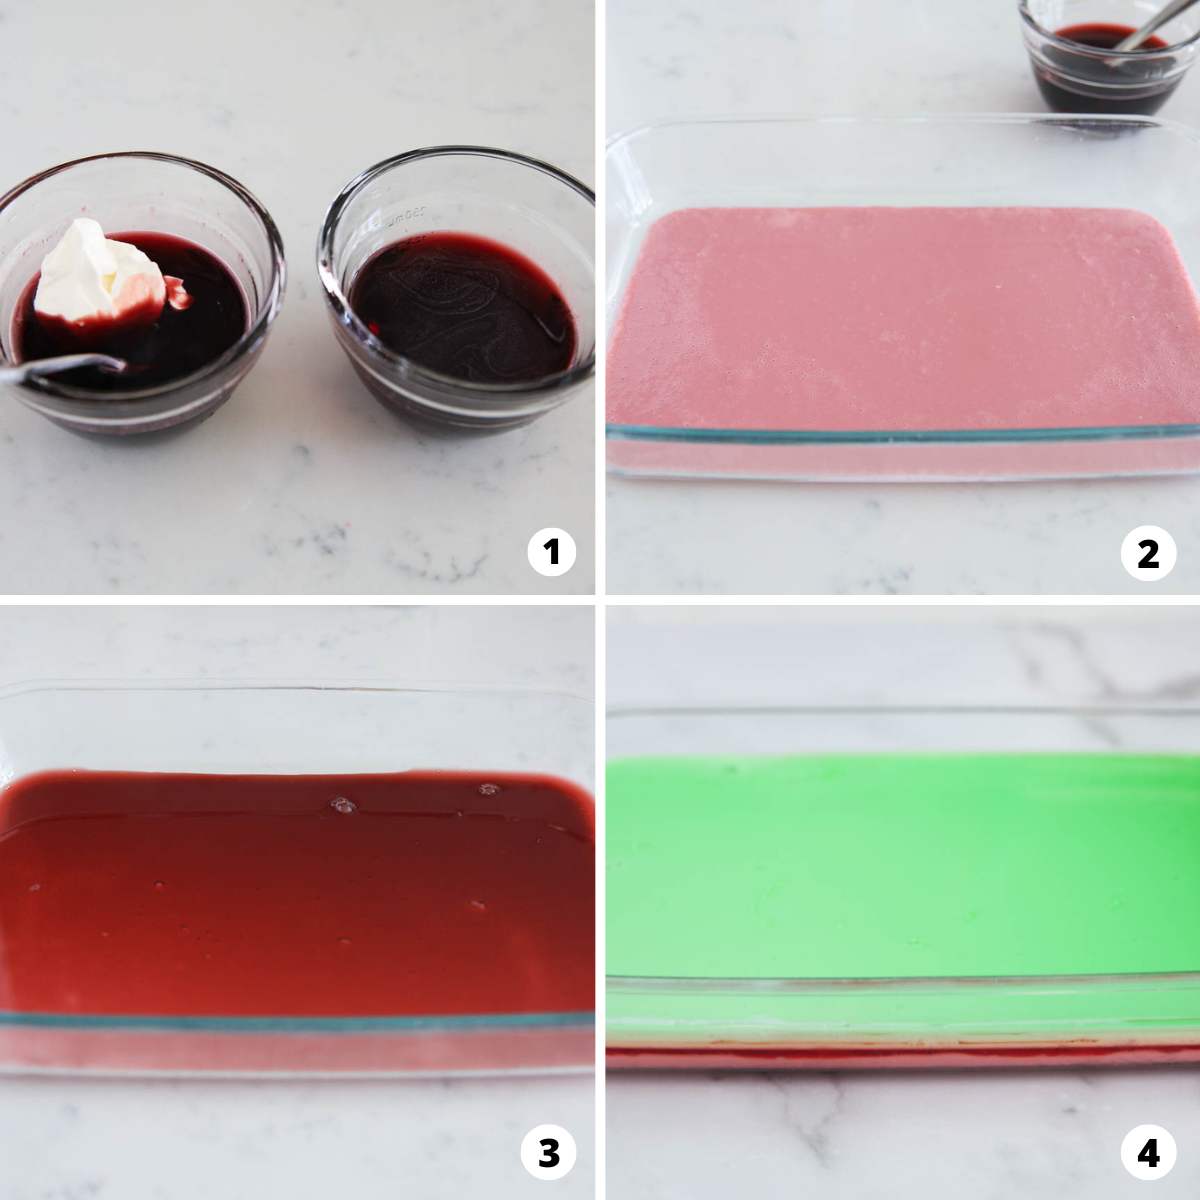 The process of making rainbow jello in a four step photo collage. 